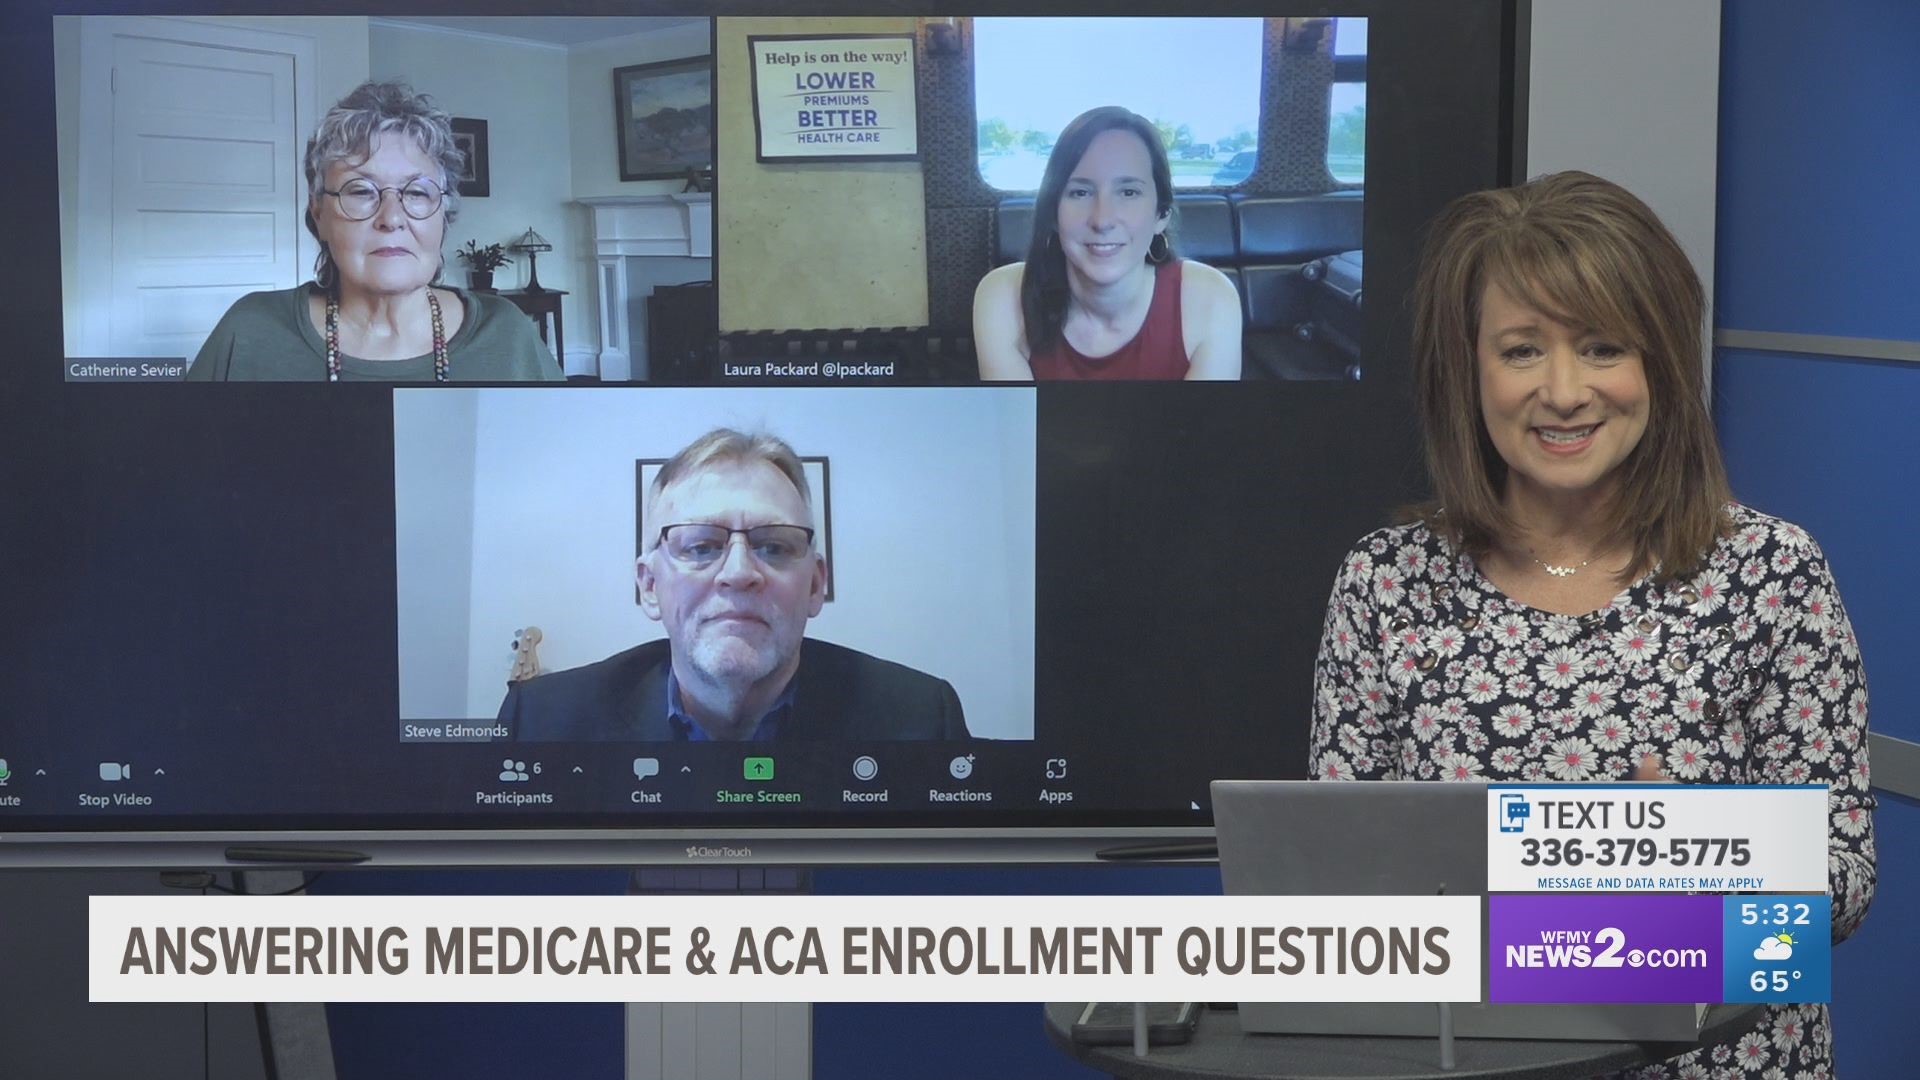 2 Wants to Know’s Medicare and ACA experts are answering all your questions to help you navigate the enrollment process.